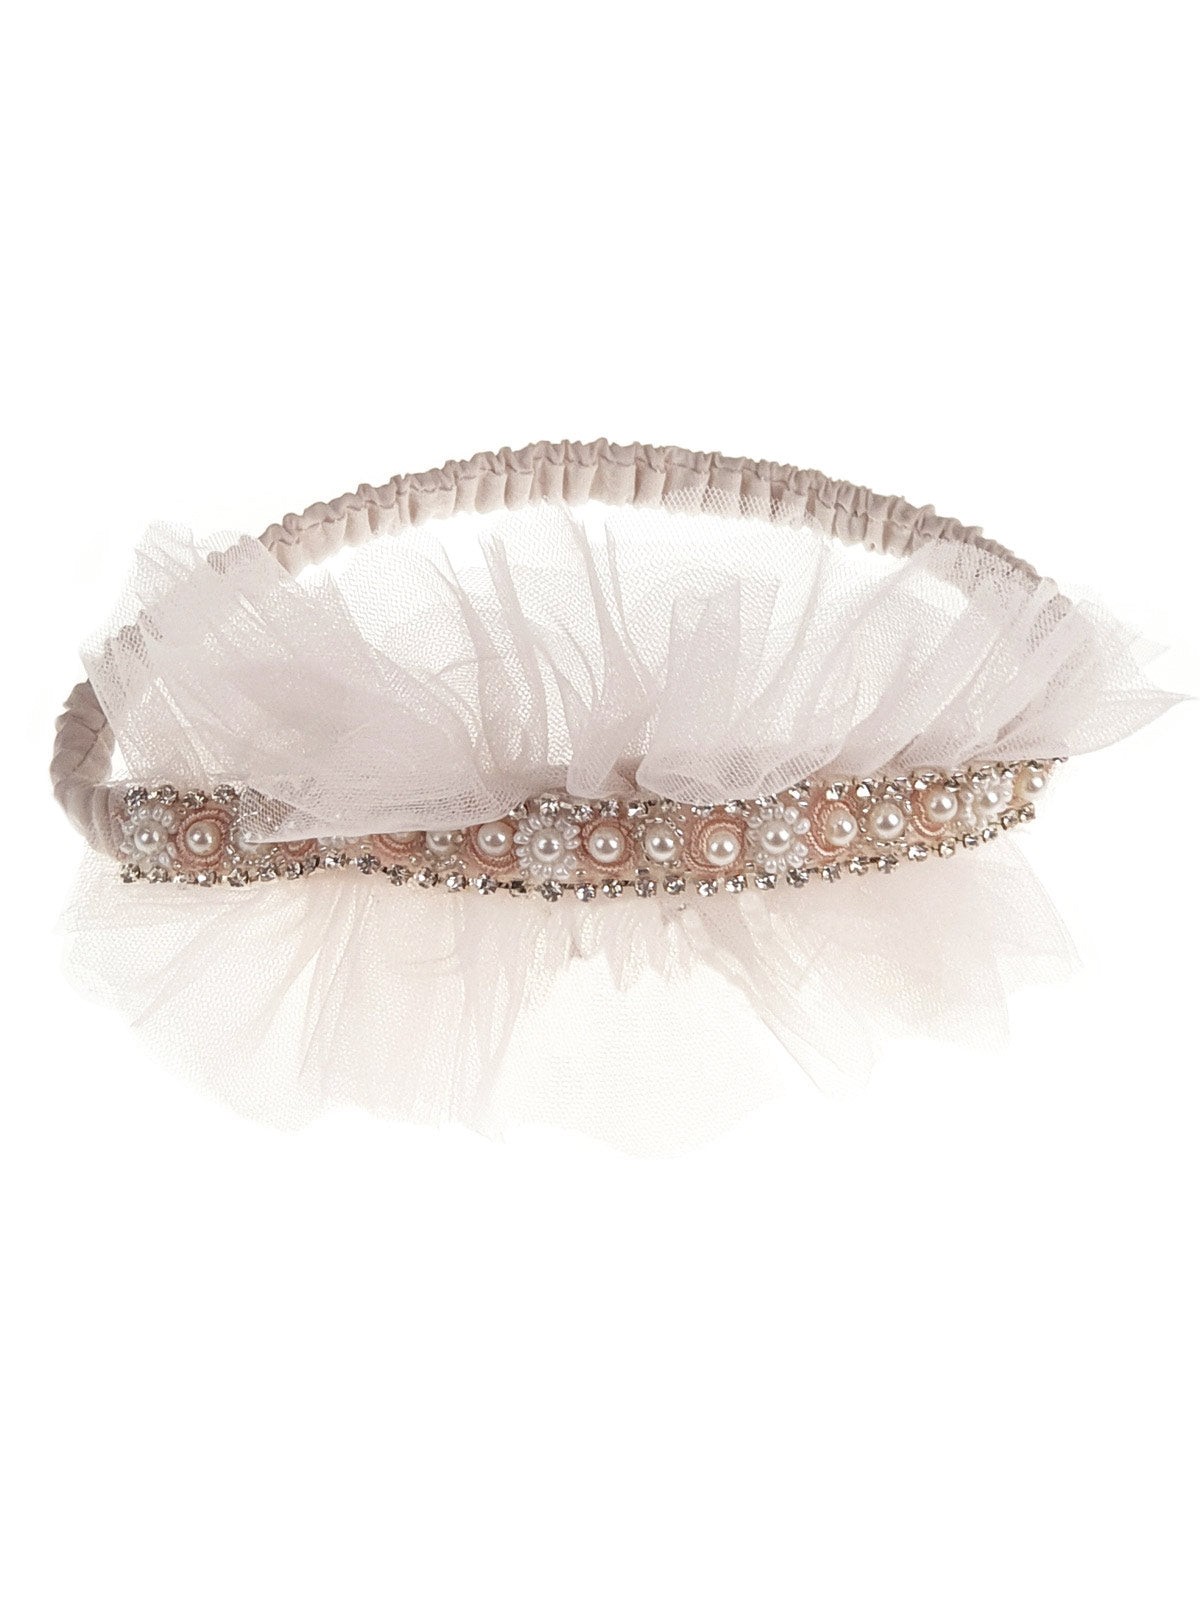 Girl's Headband with pearls and tulle -SOUSOU